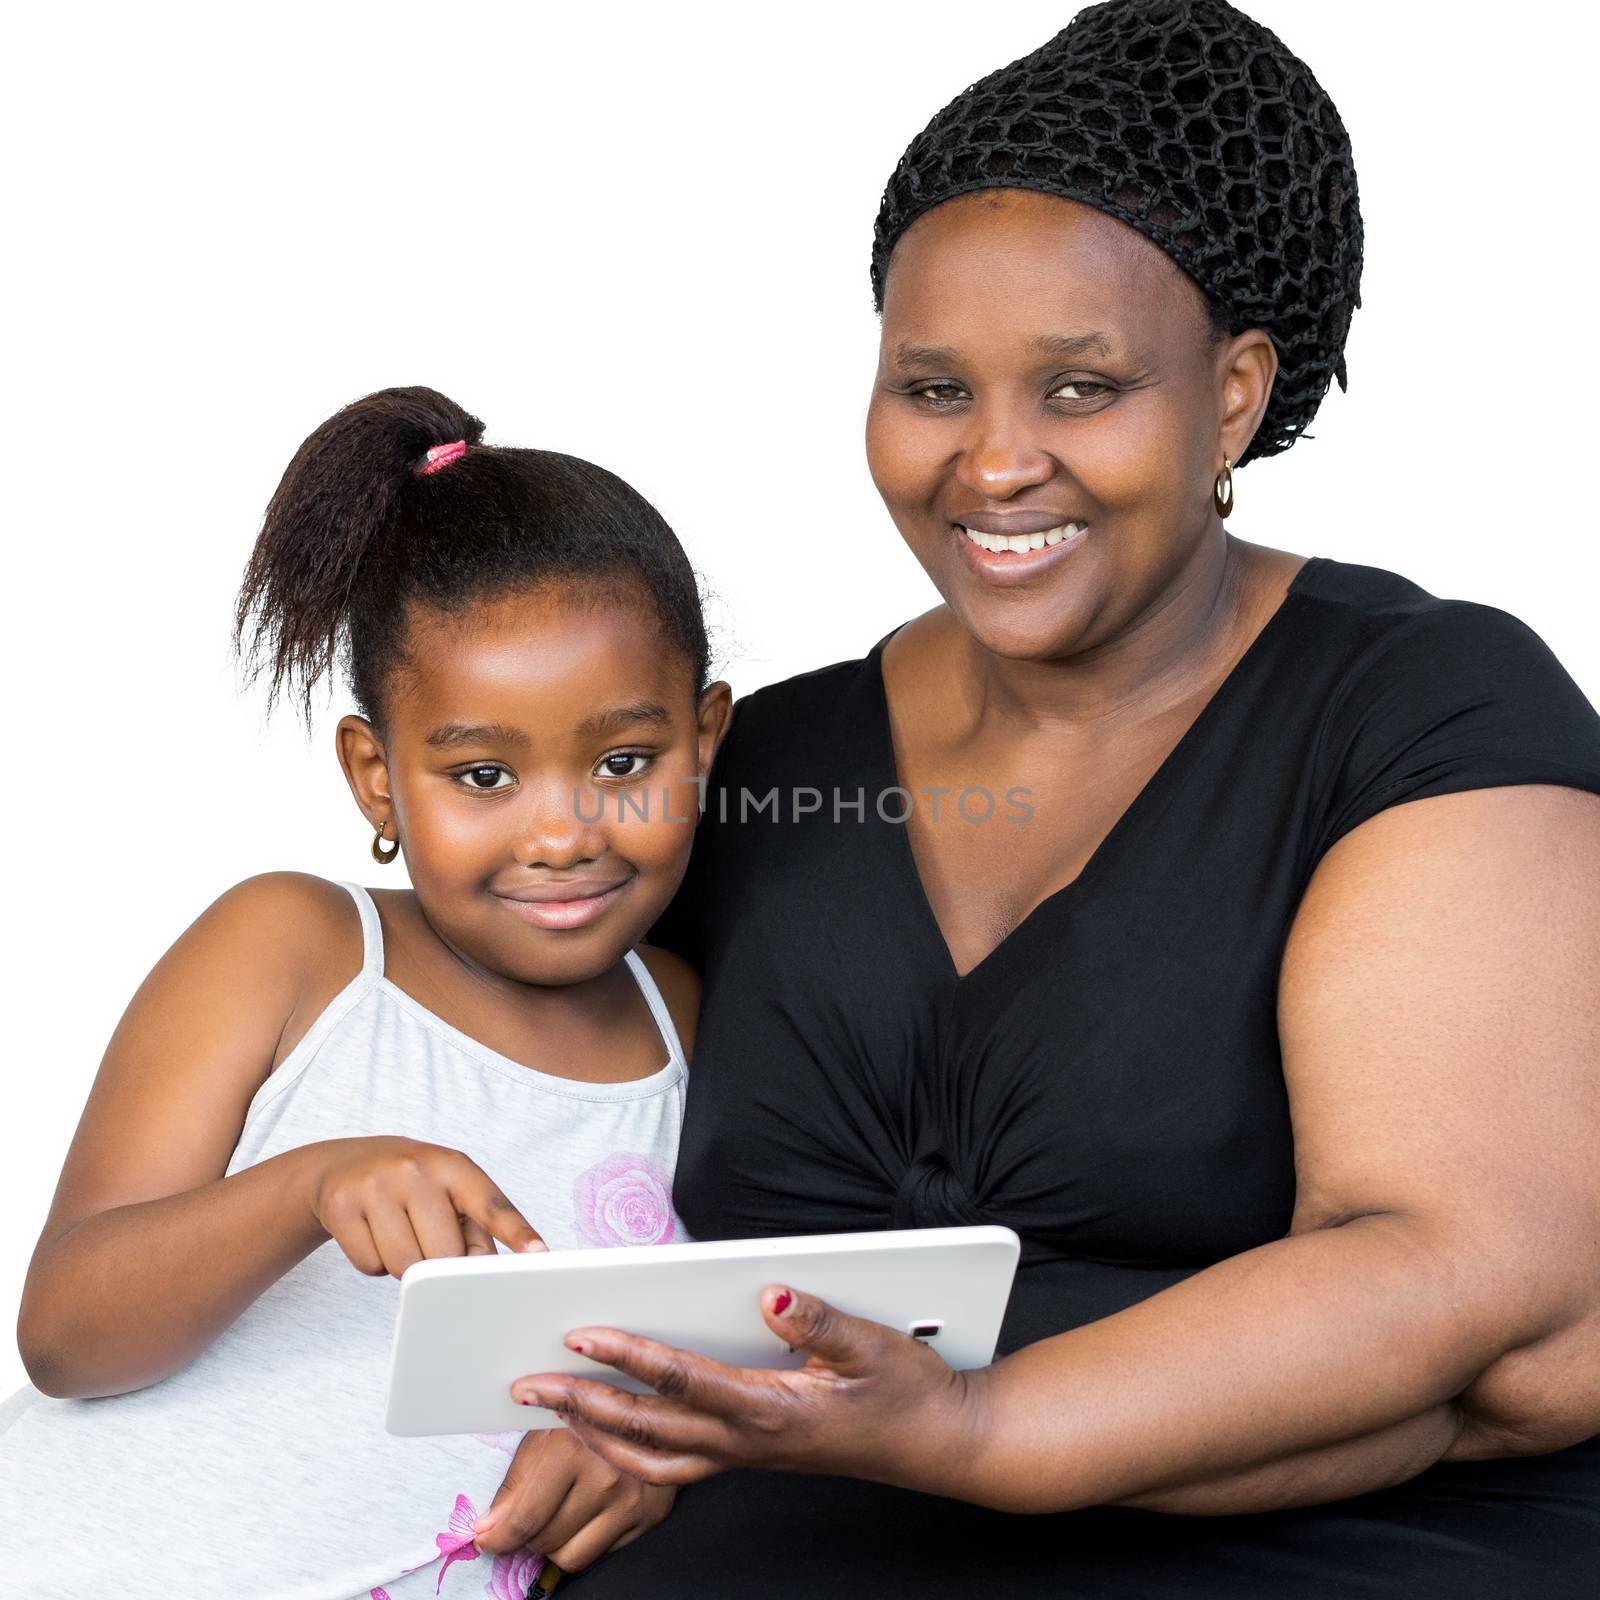 Close up portrait of little african girl and mother holding digital tablet isolated on white background.Mother and daughter looking at camera.